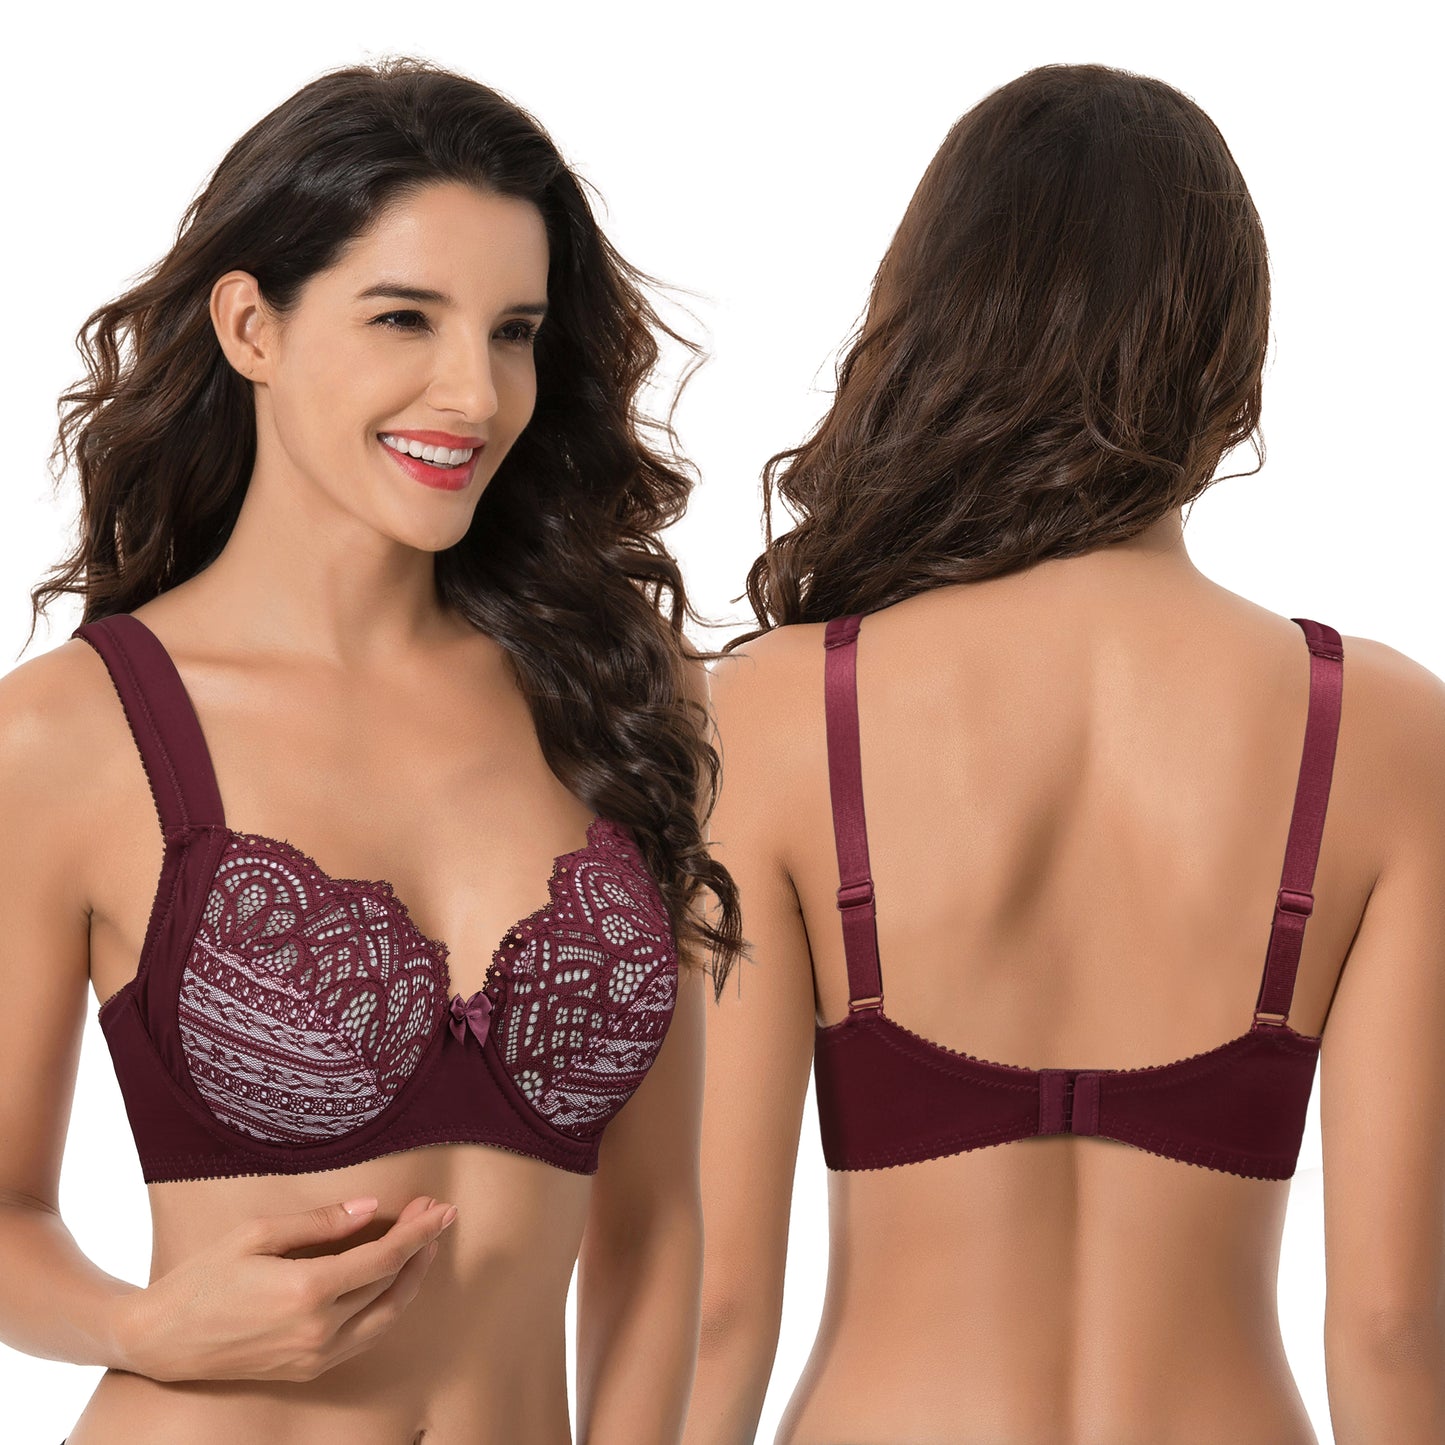 Women's Plus Size Unlined Underwire Lace Bra with Cushion Straps-Burgundy,Grey